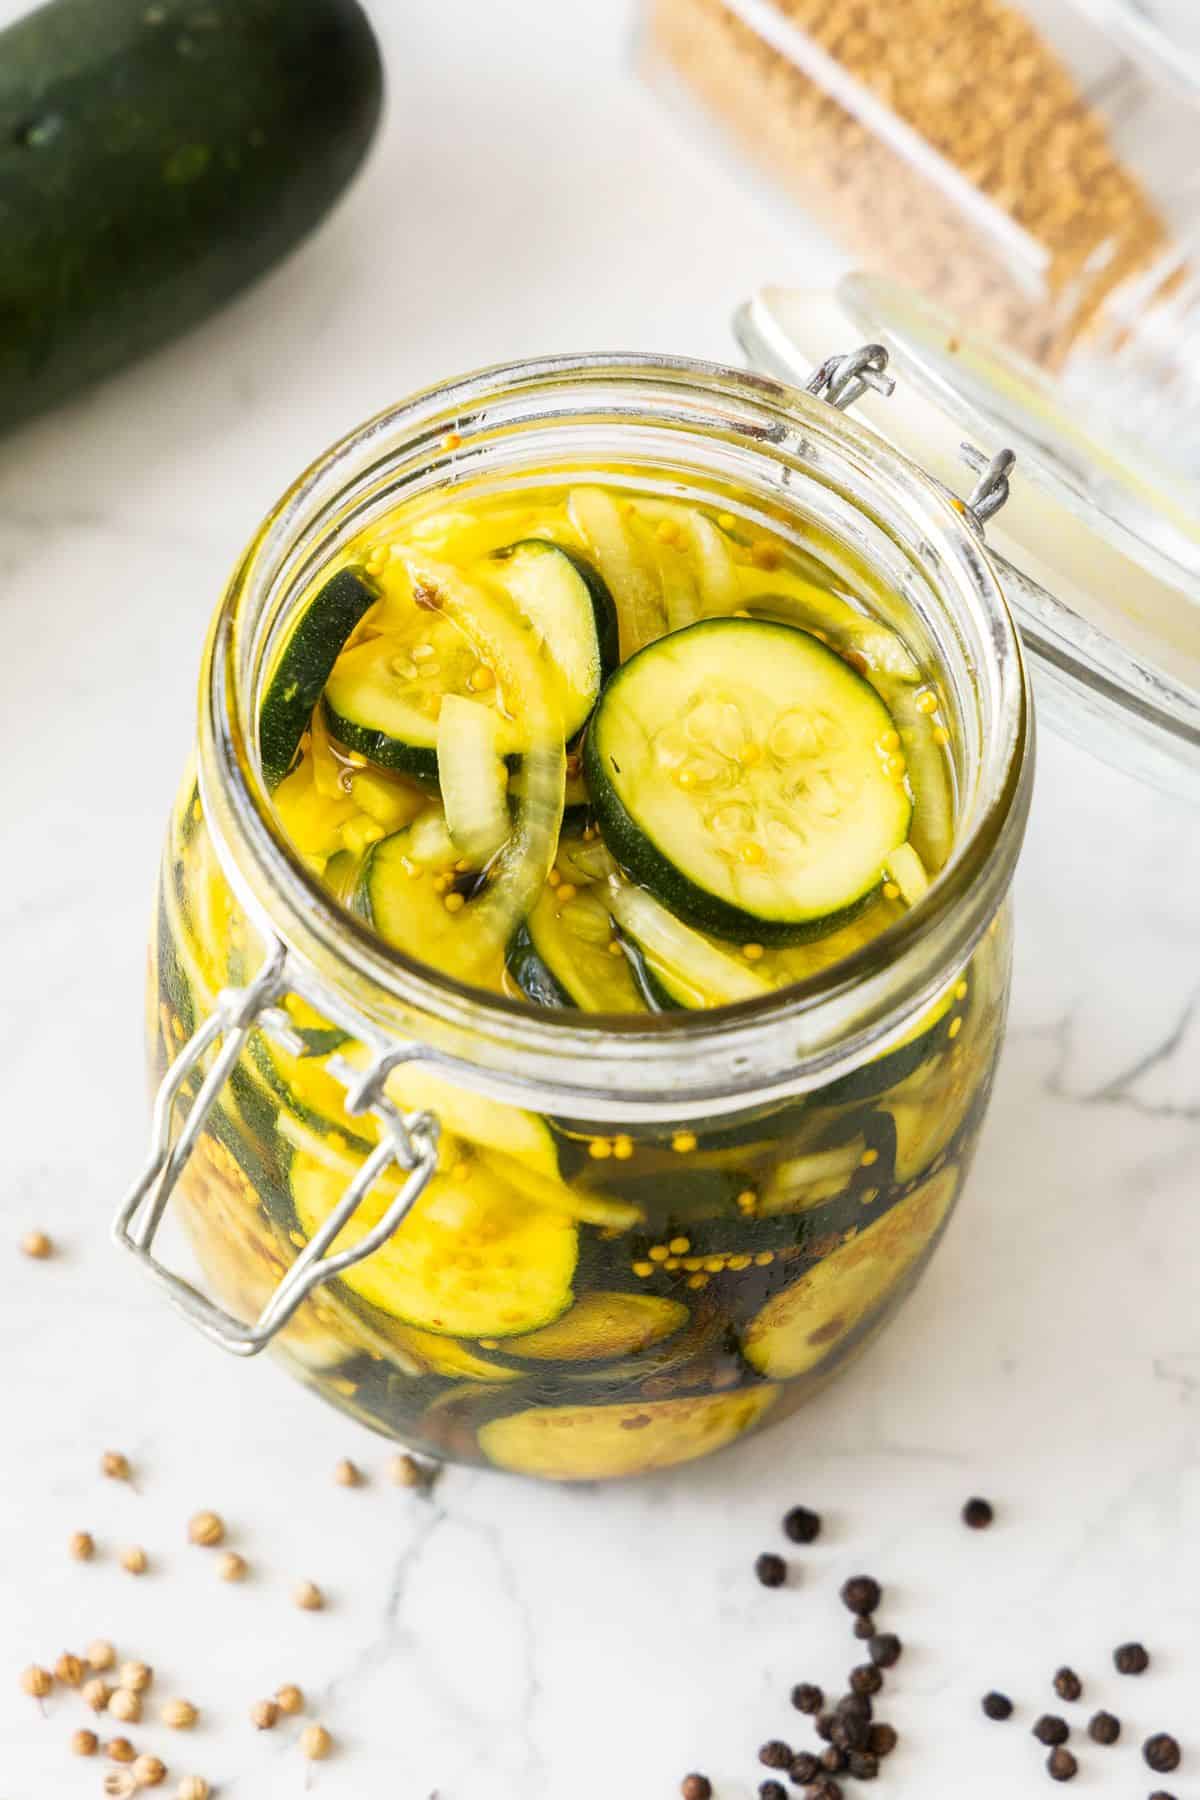 Jar of Pickled Zucchini, with some of the spices and seasonings used around the edge.